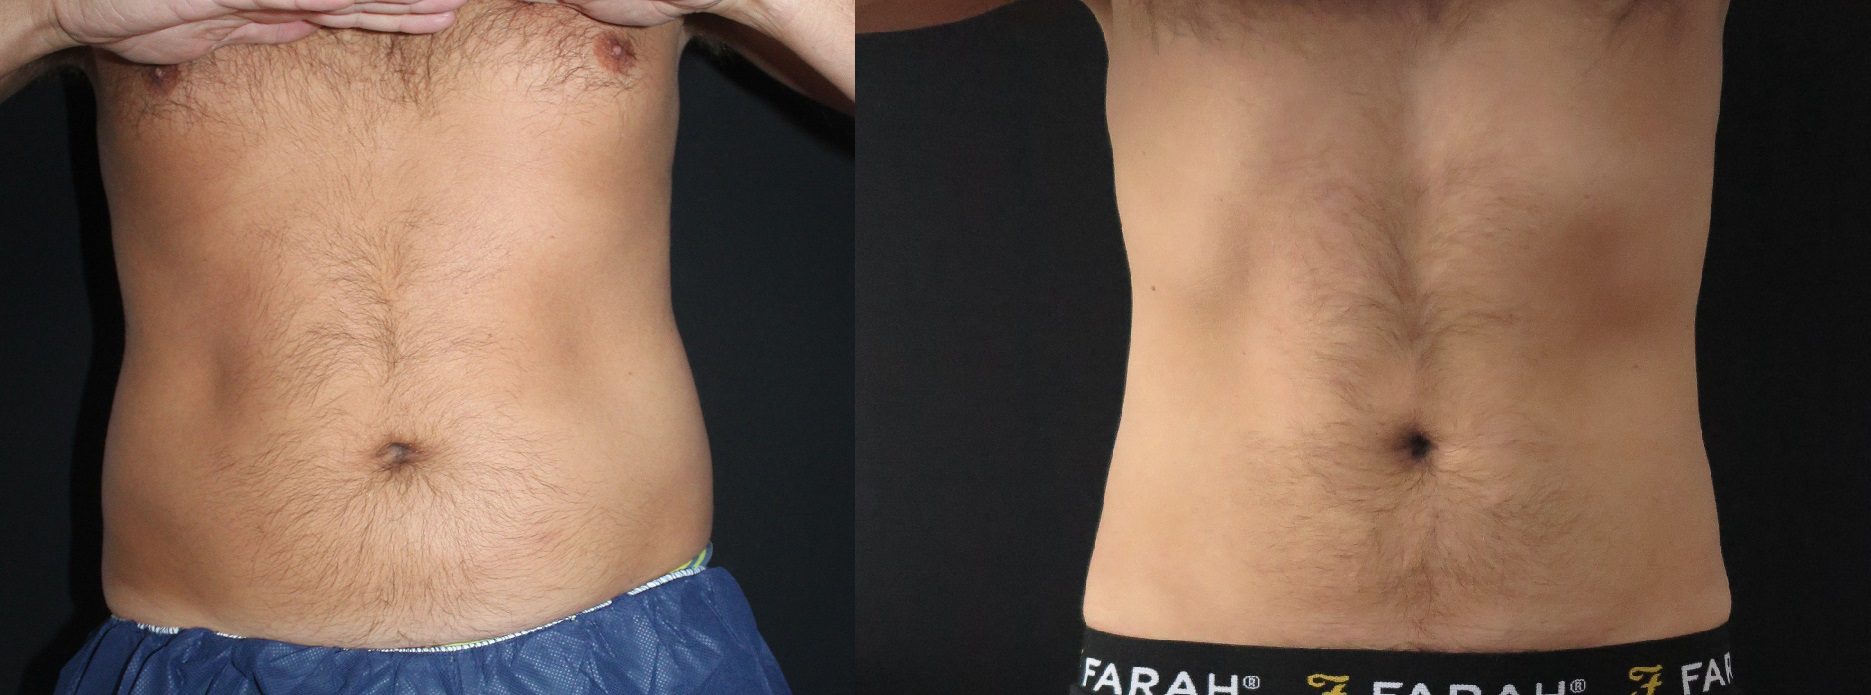 Coolsculpting before and after abdomen fat